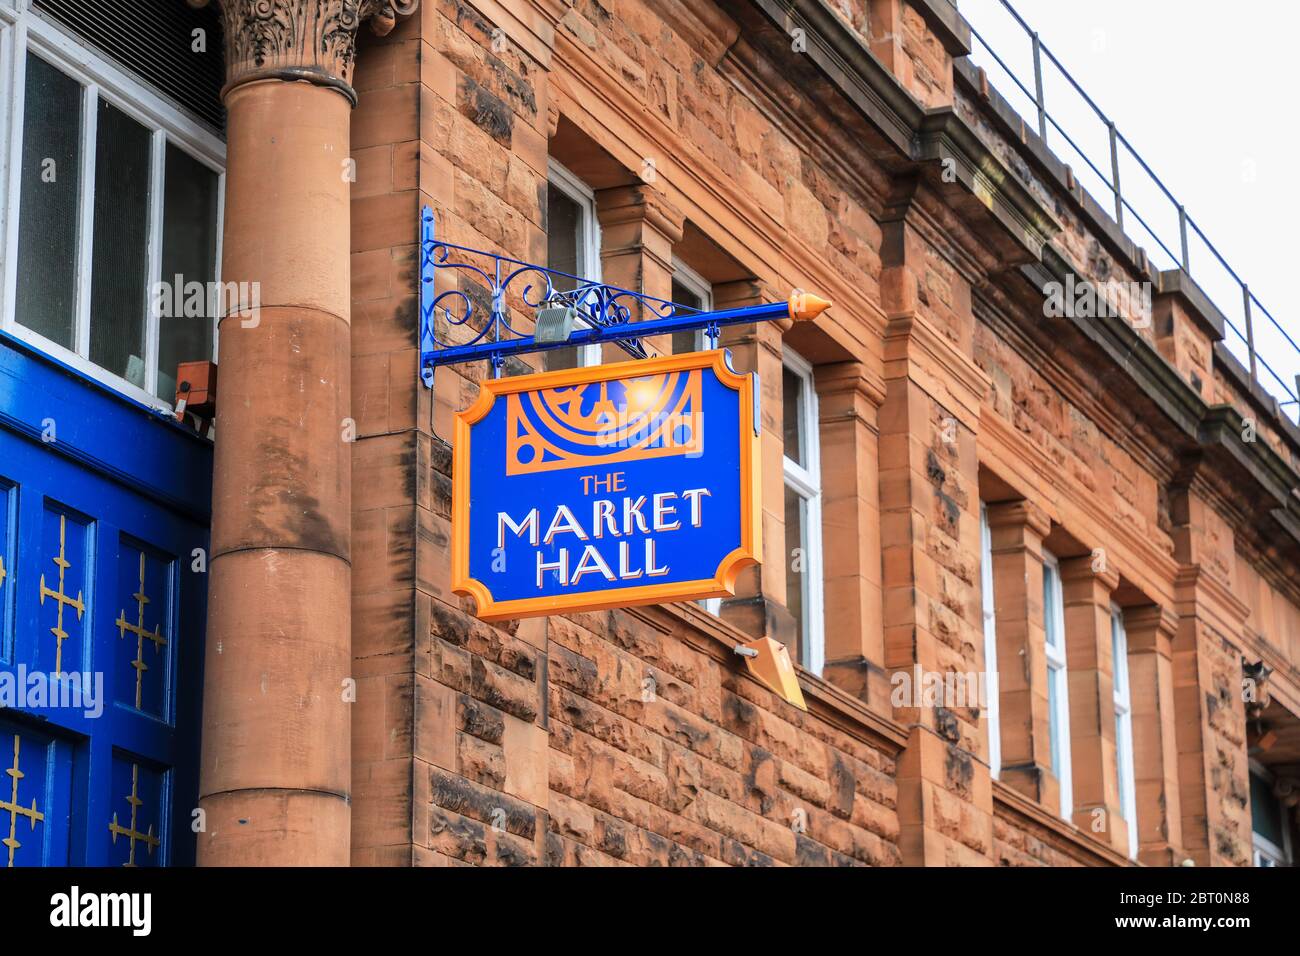 A sign for the Market Hall in Scotch Street in the town centre of Carlisle, Cumbria, England, UK Stock Photo